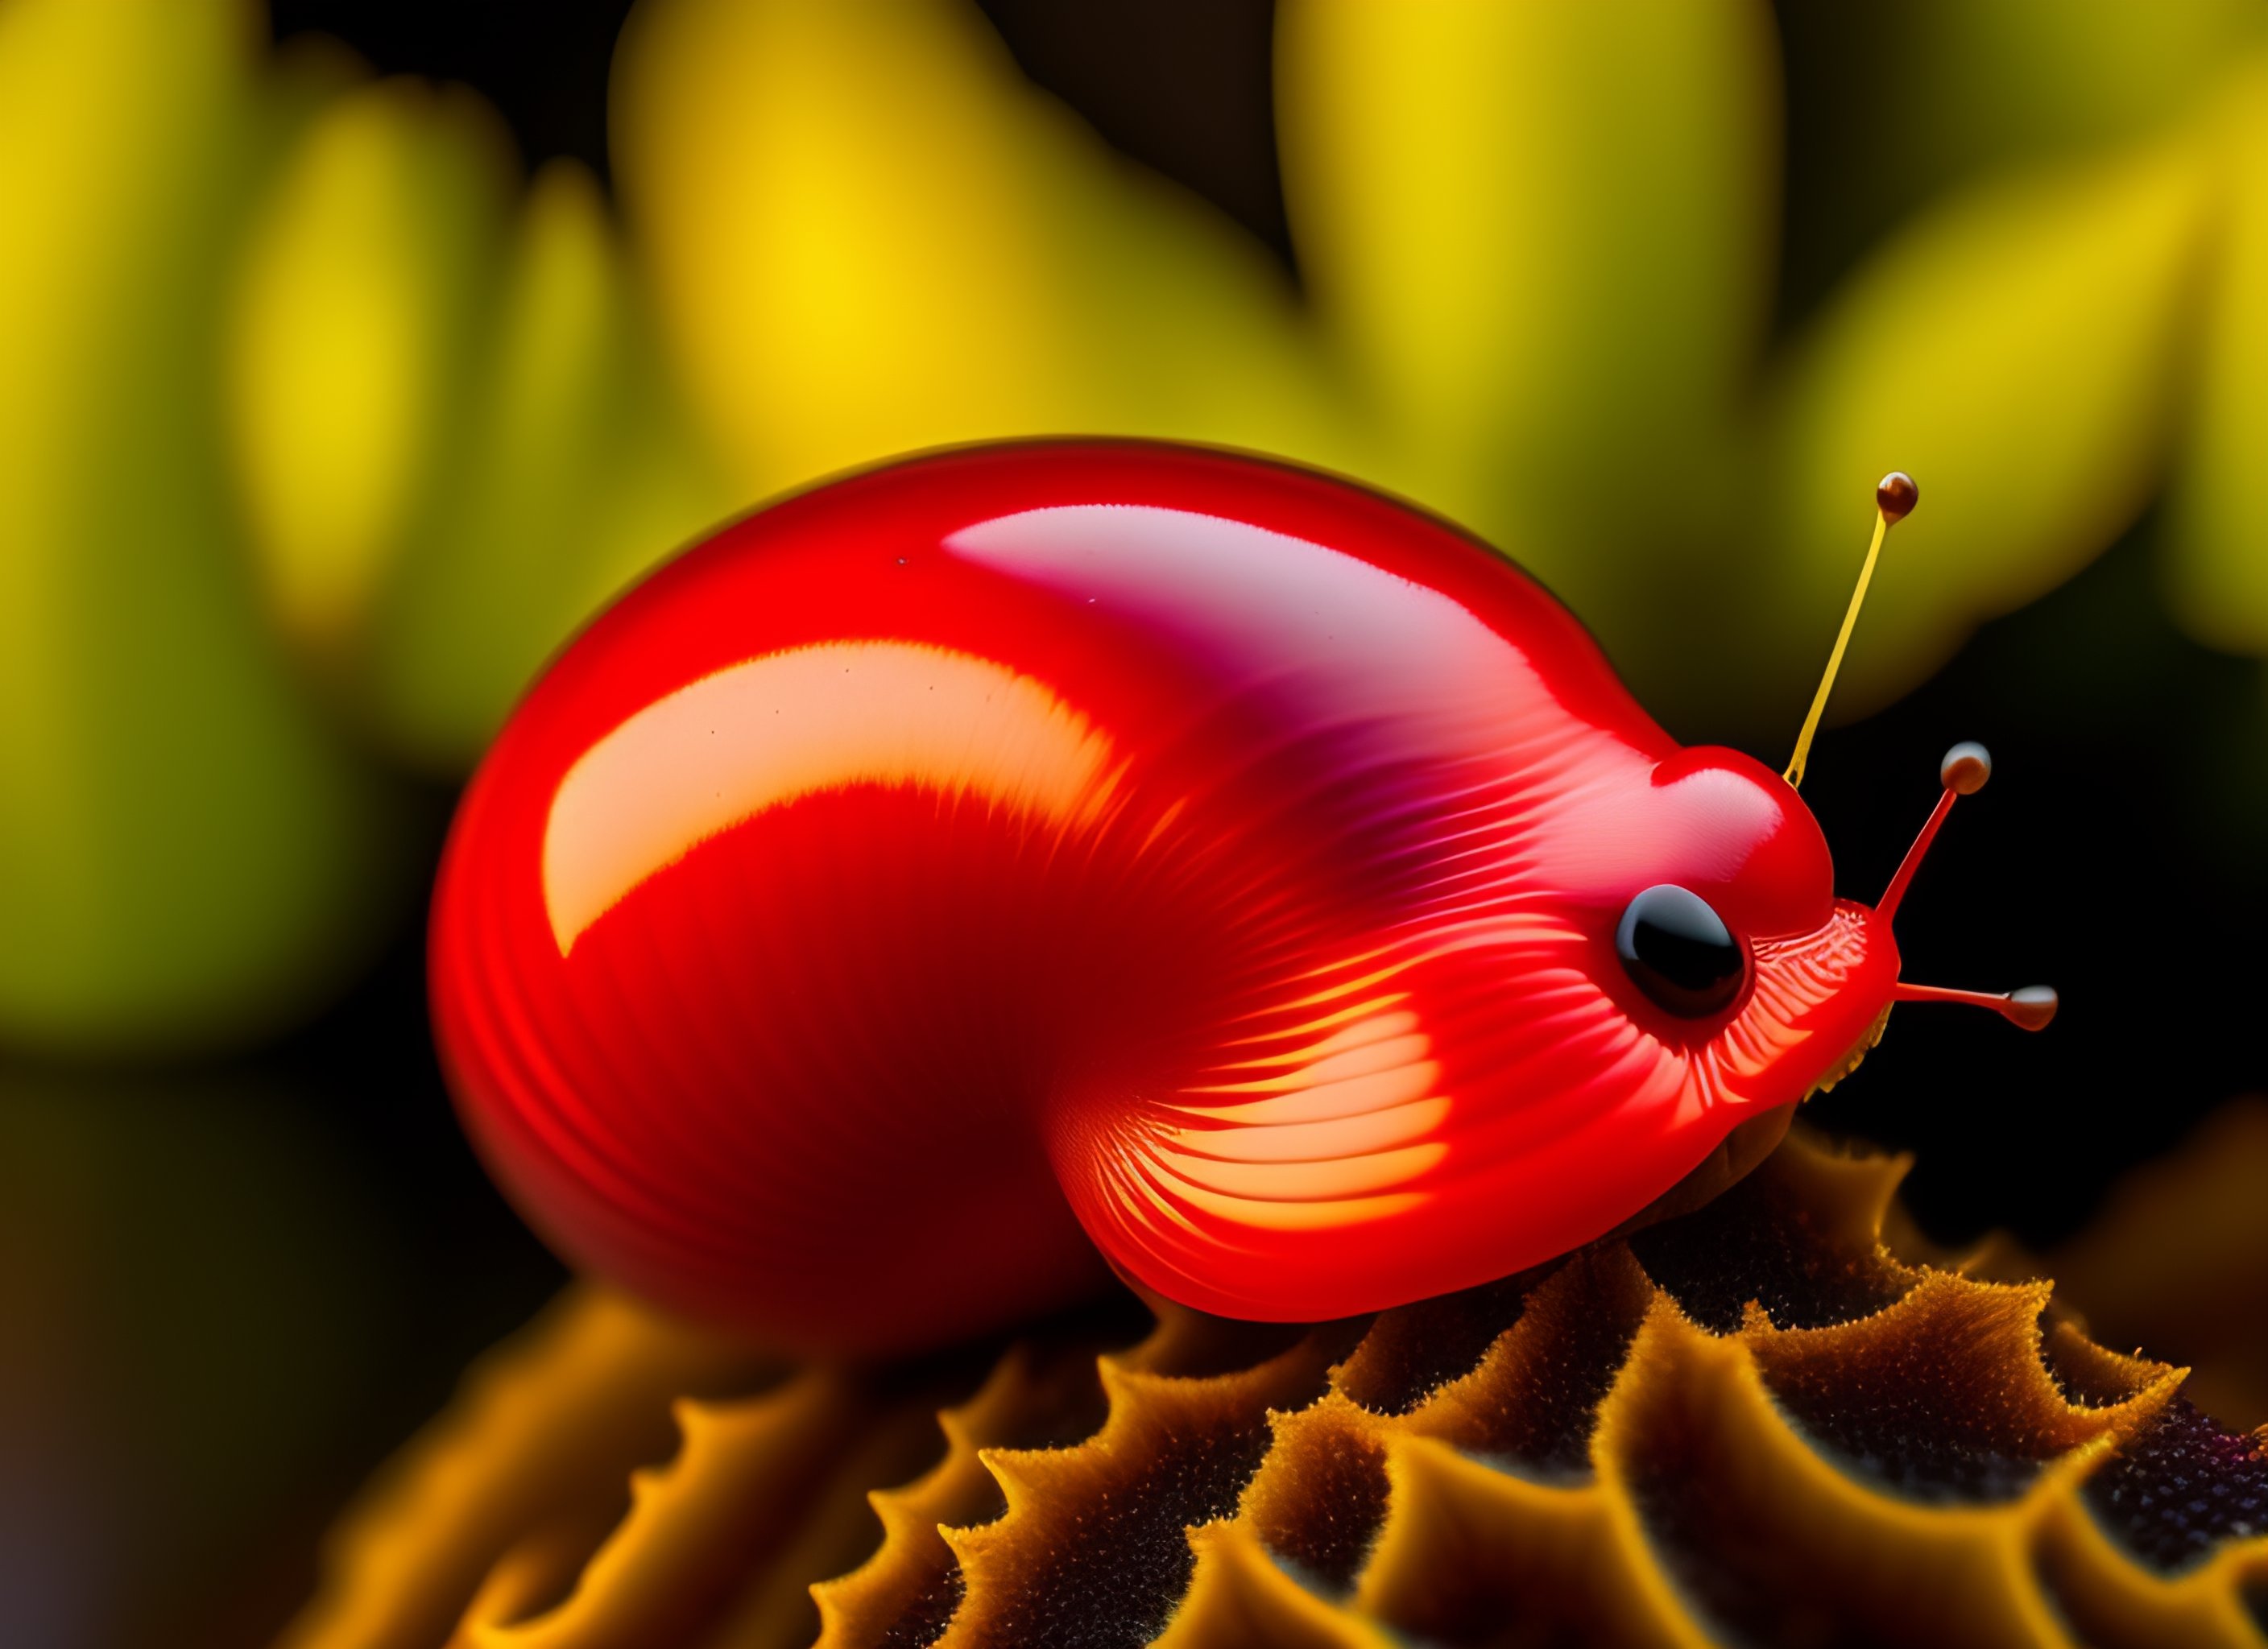 Lexica - A photograph of a glossy red snail with huge black eyes